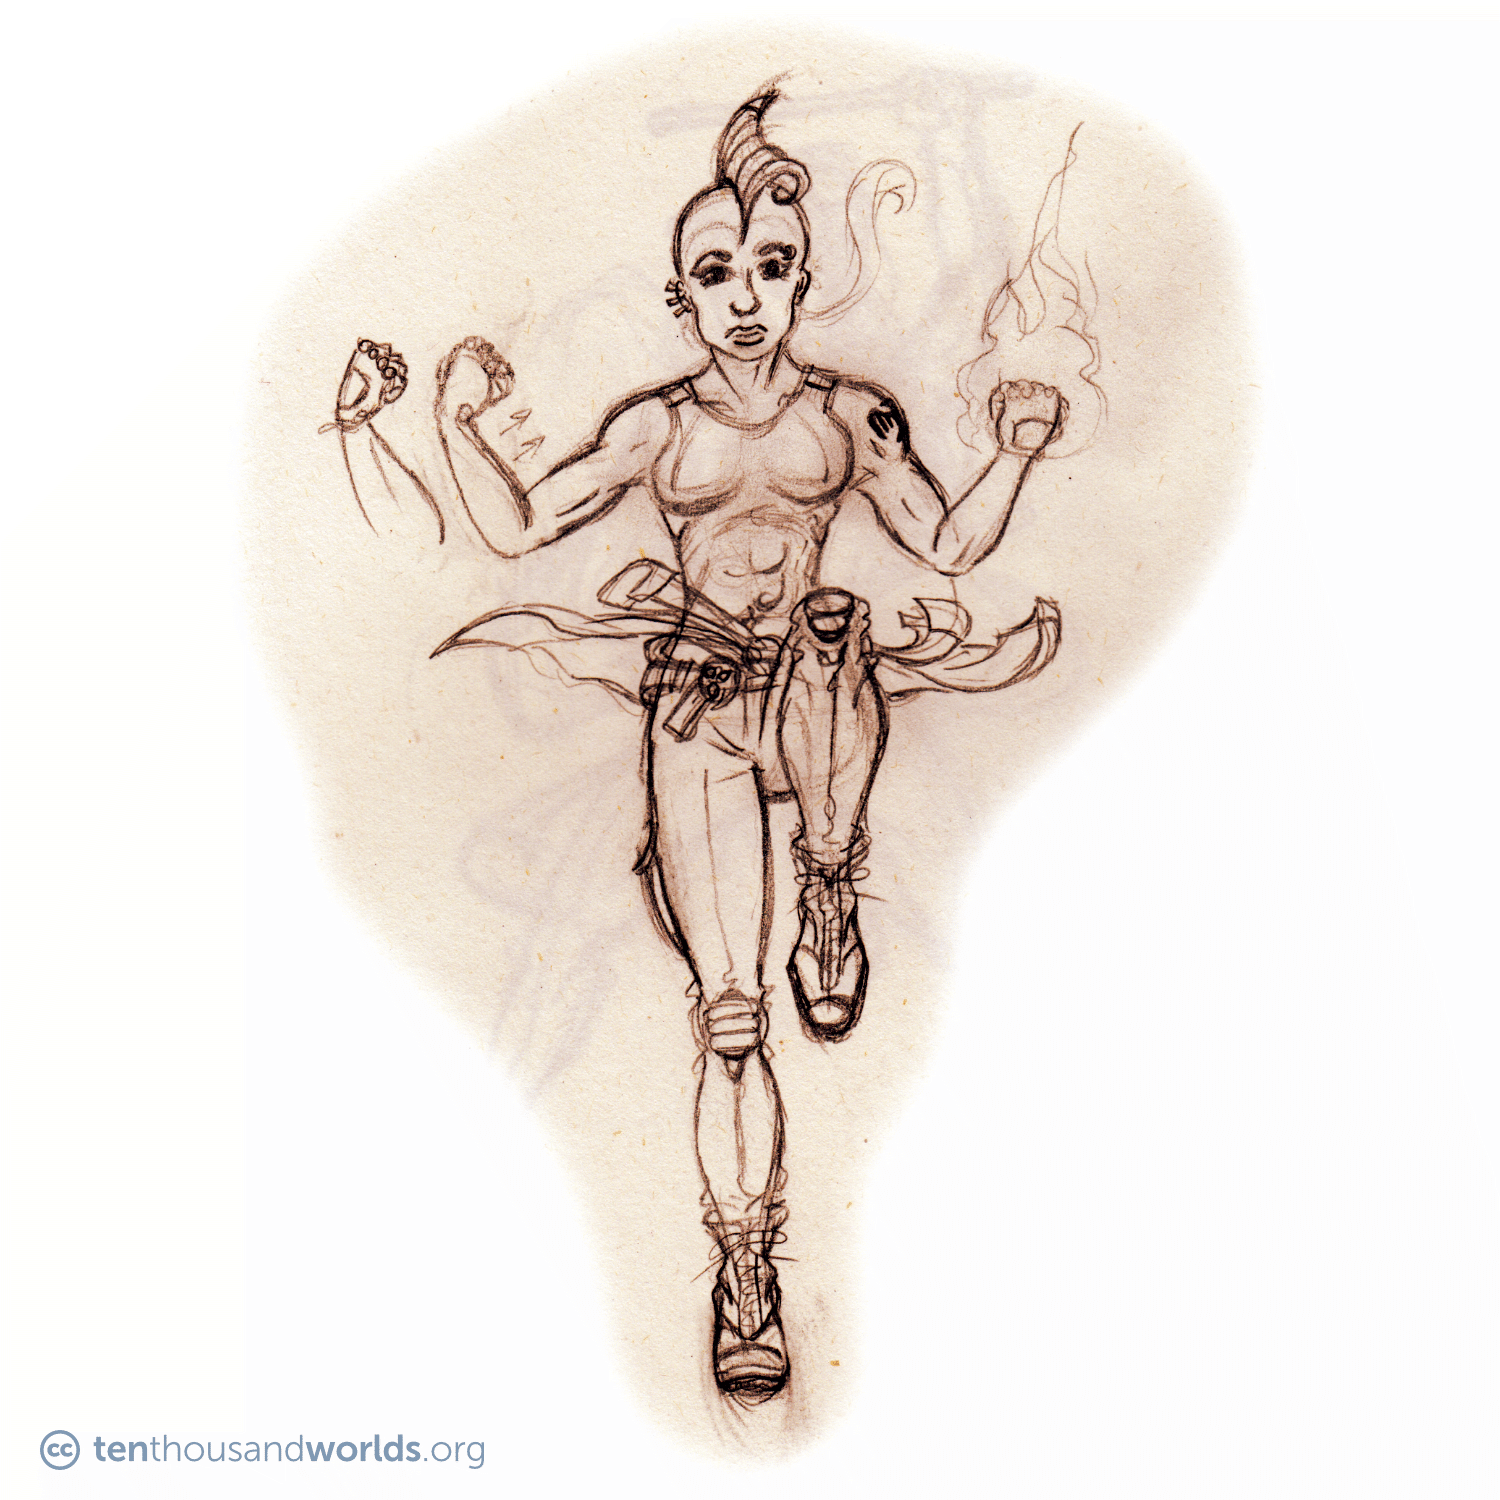 A pencil sketch of a strong, athletic young woman landing from a jump, on one foot; She wears heavy boots, military-style pants with padded knees, a shirt wrapped around her waist, an athletic t-shirt, and biker gloves; She sports a Mohawk that curls in the front, multiple earrings, and a German eagle shoulder tattoo.